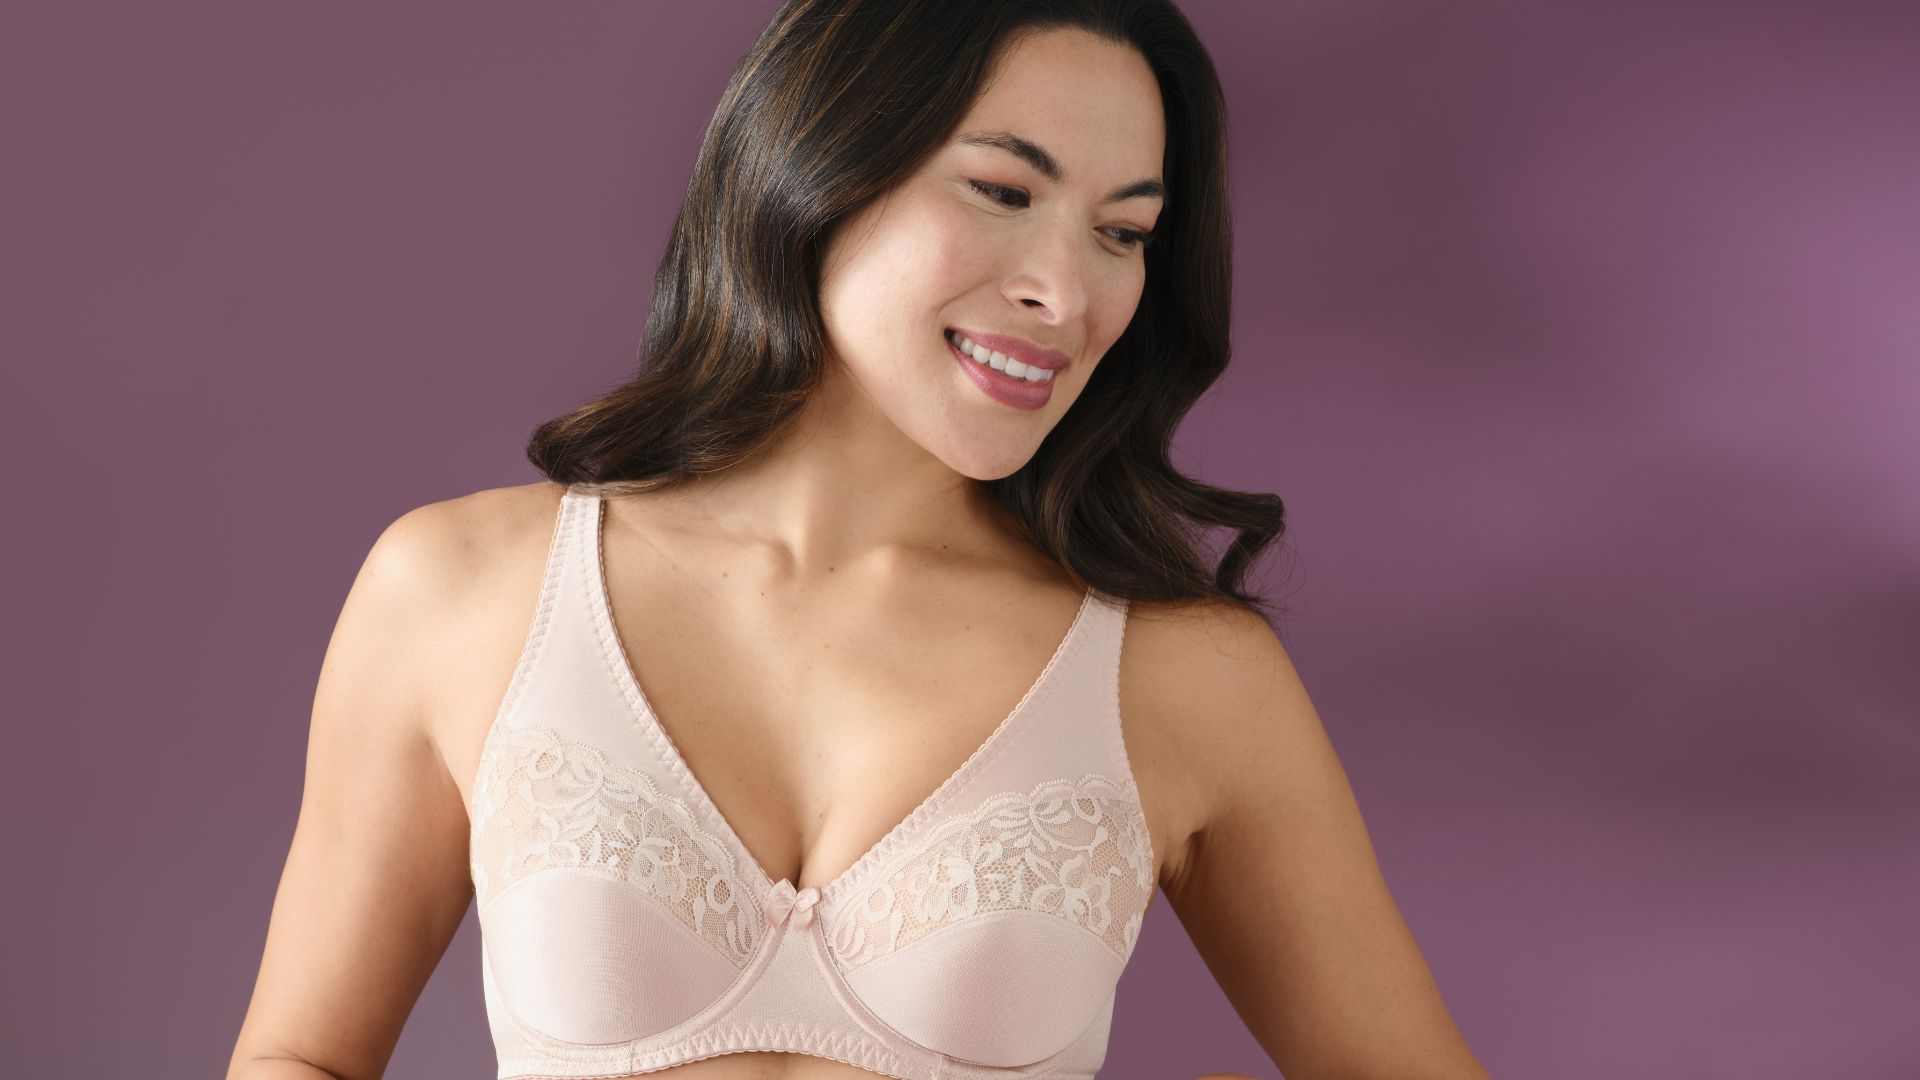 Your favourite t-shirt bra to a GG cup - The Lingerie Hub